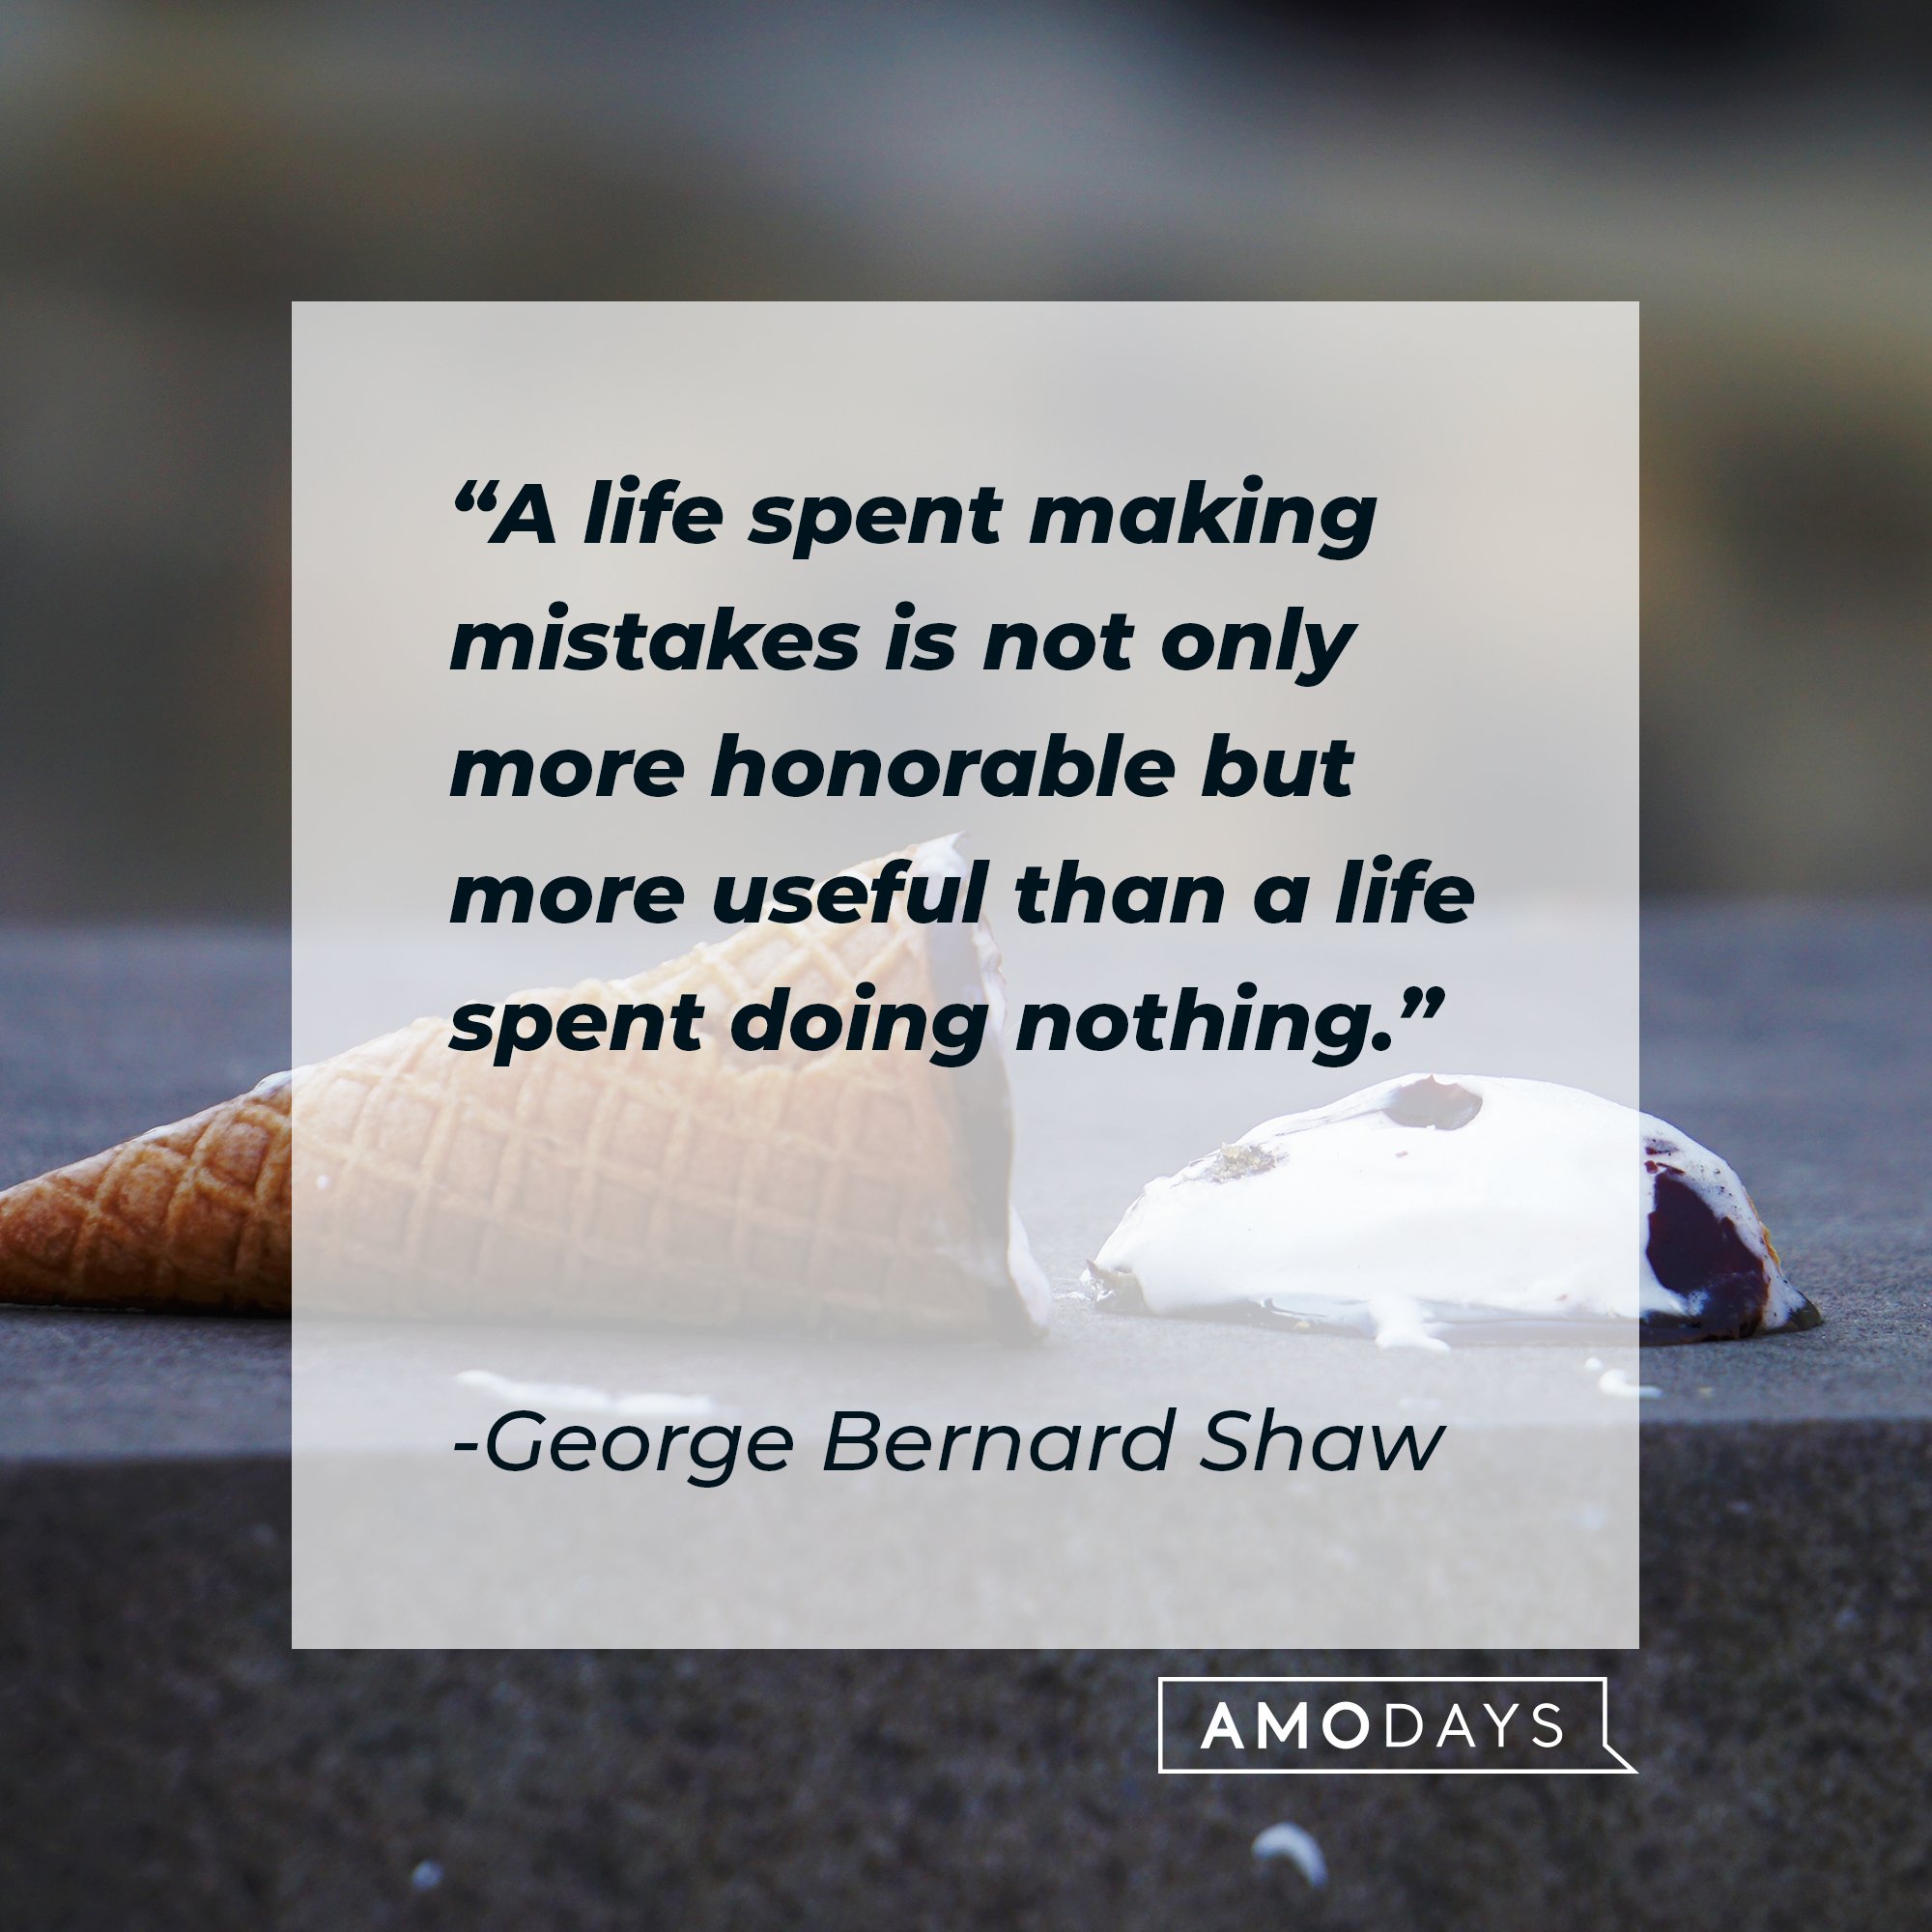 George Bernard Shaw’s quote: "A life spent making mistakes is not only more honorable but more useful than a life spent doing nothing." | Image: AmoDays